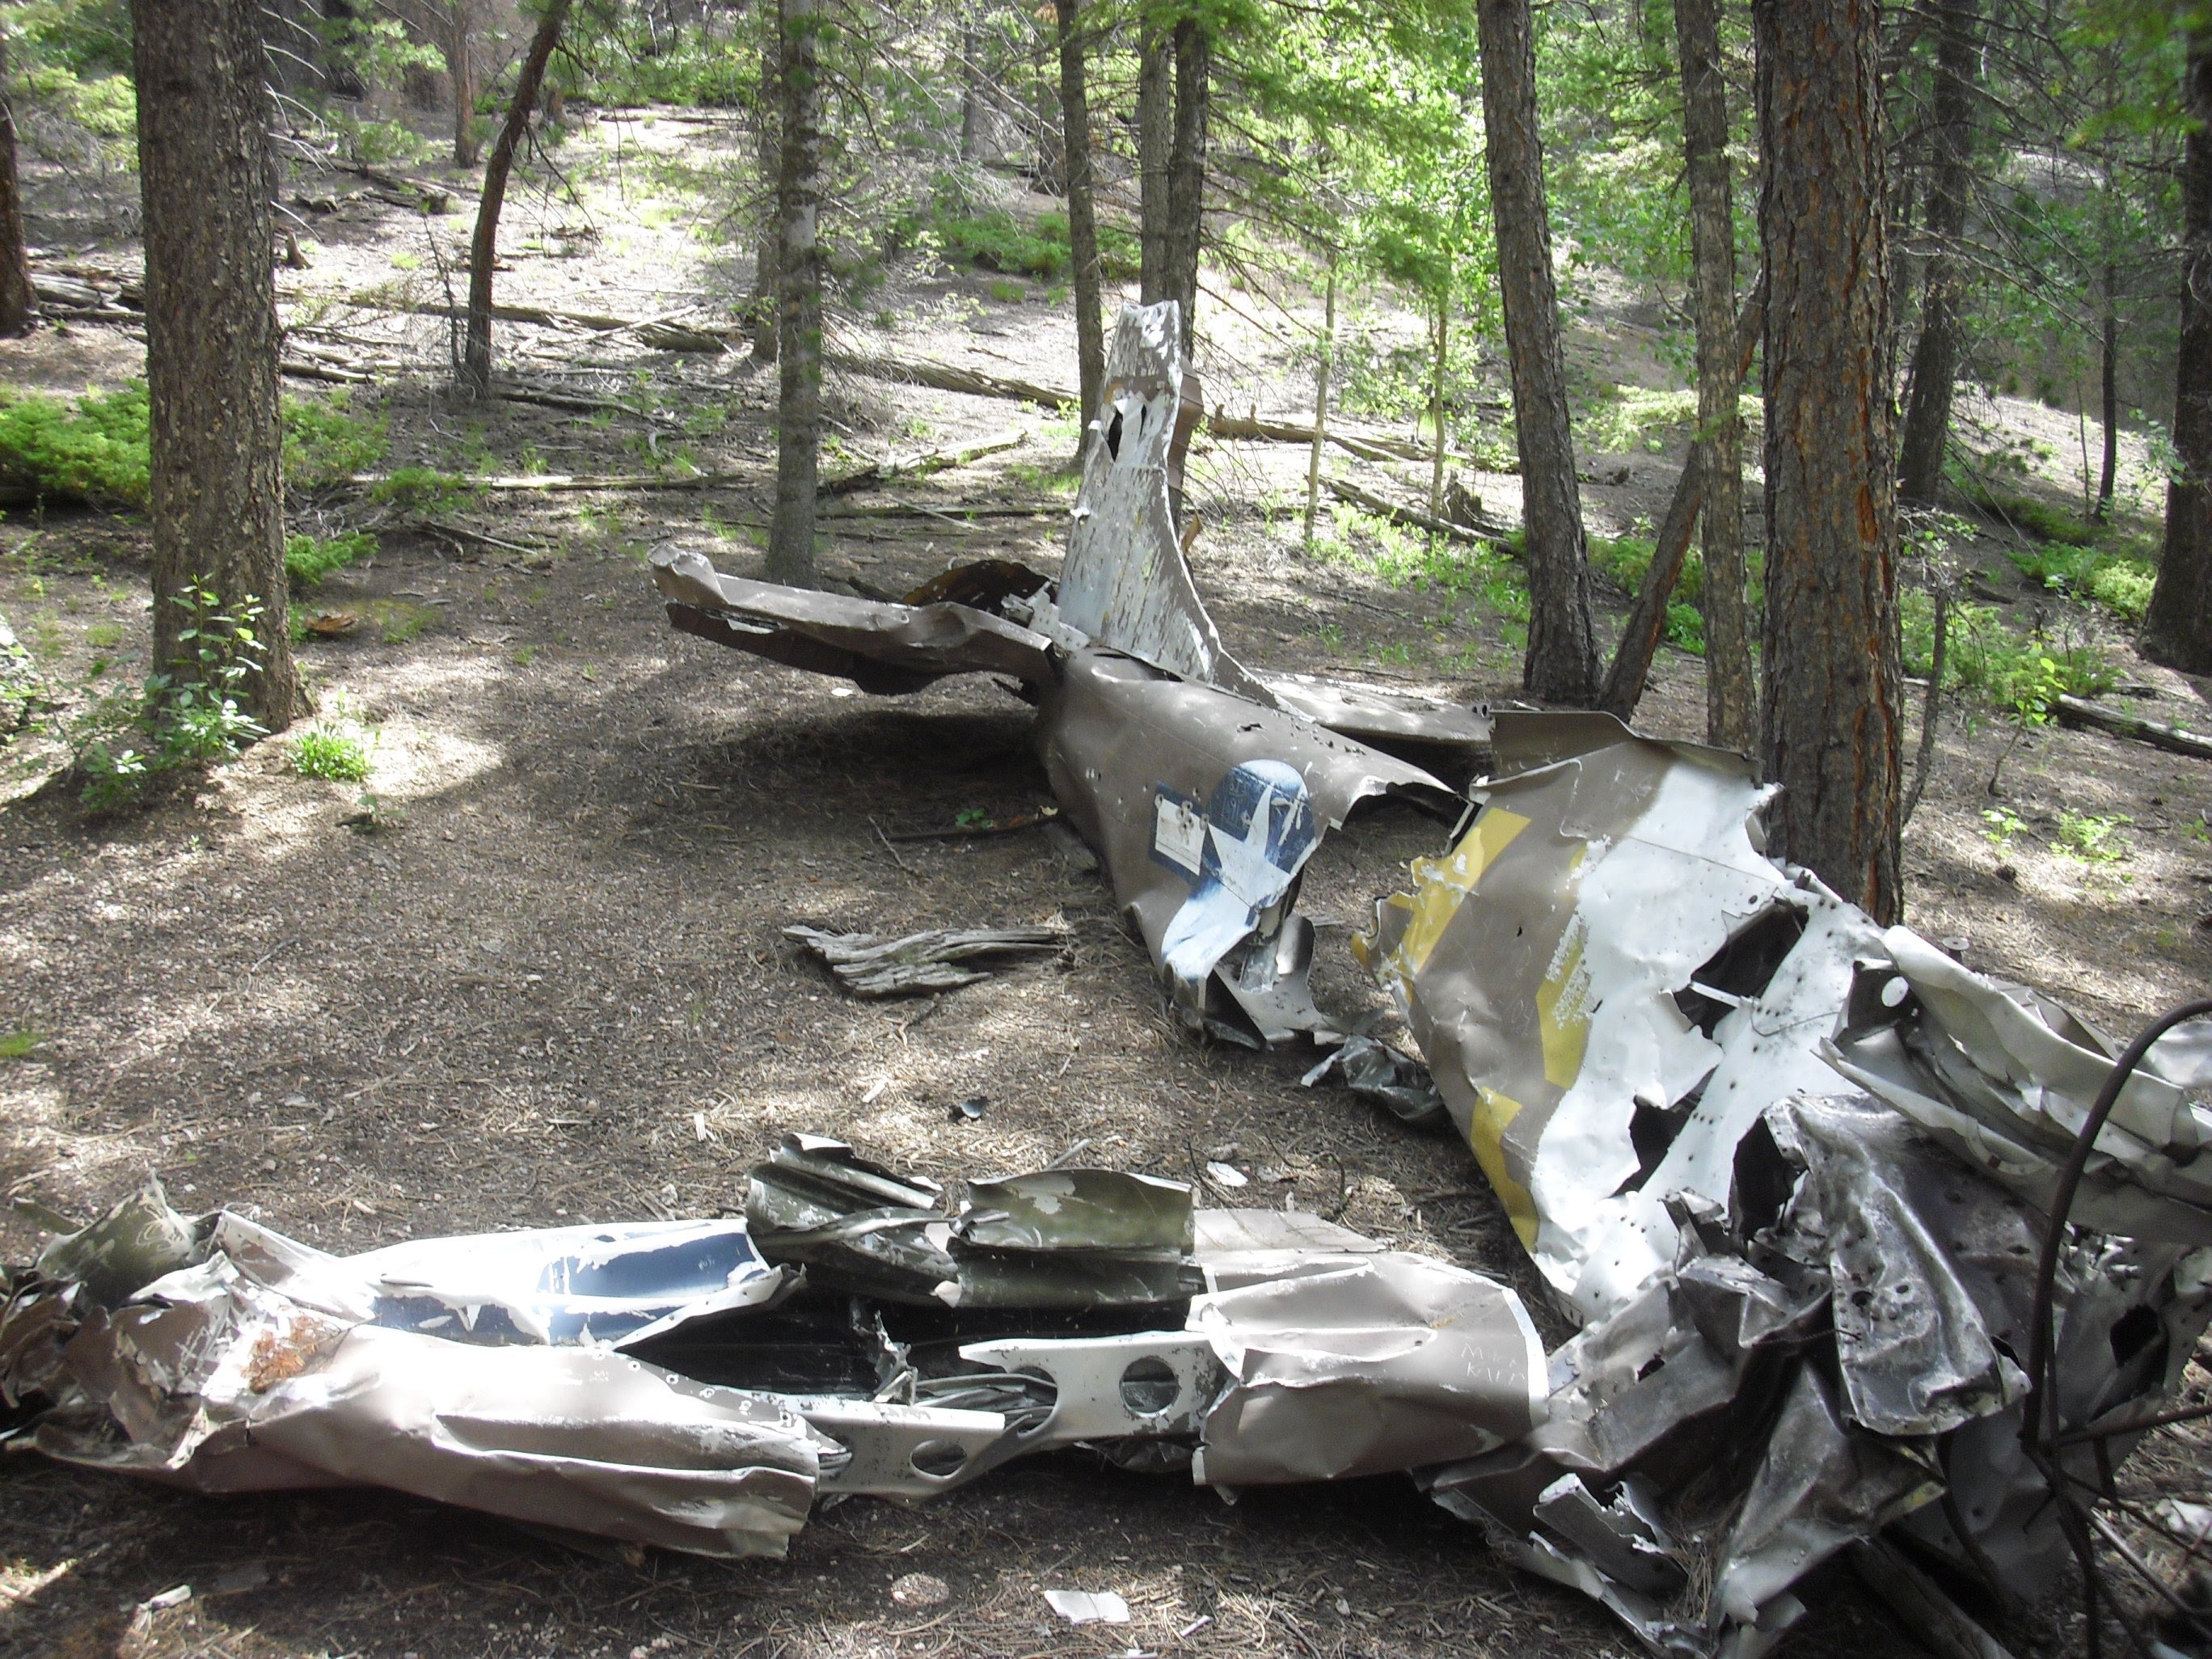 Military airplane crash site - Rampart Range, Pike National Forest ...